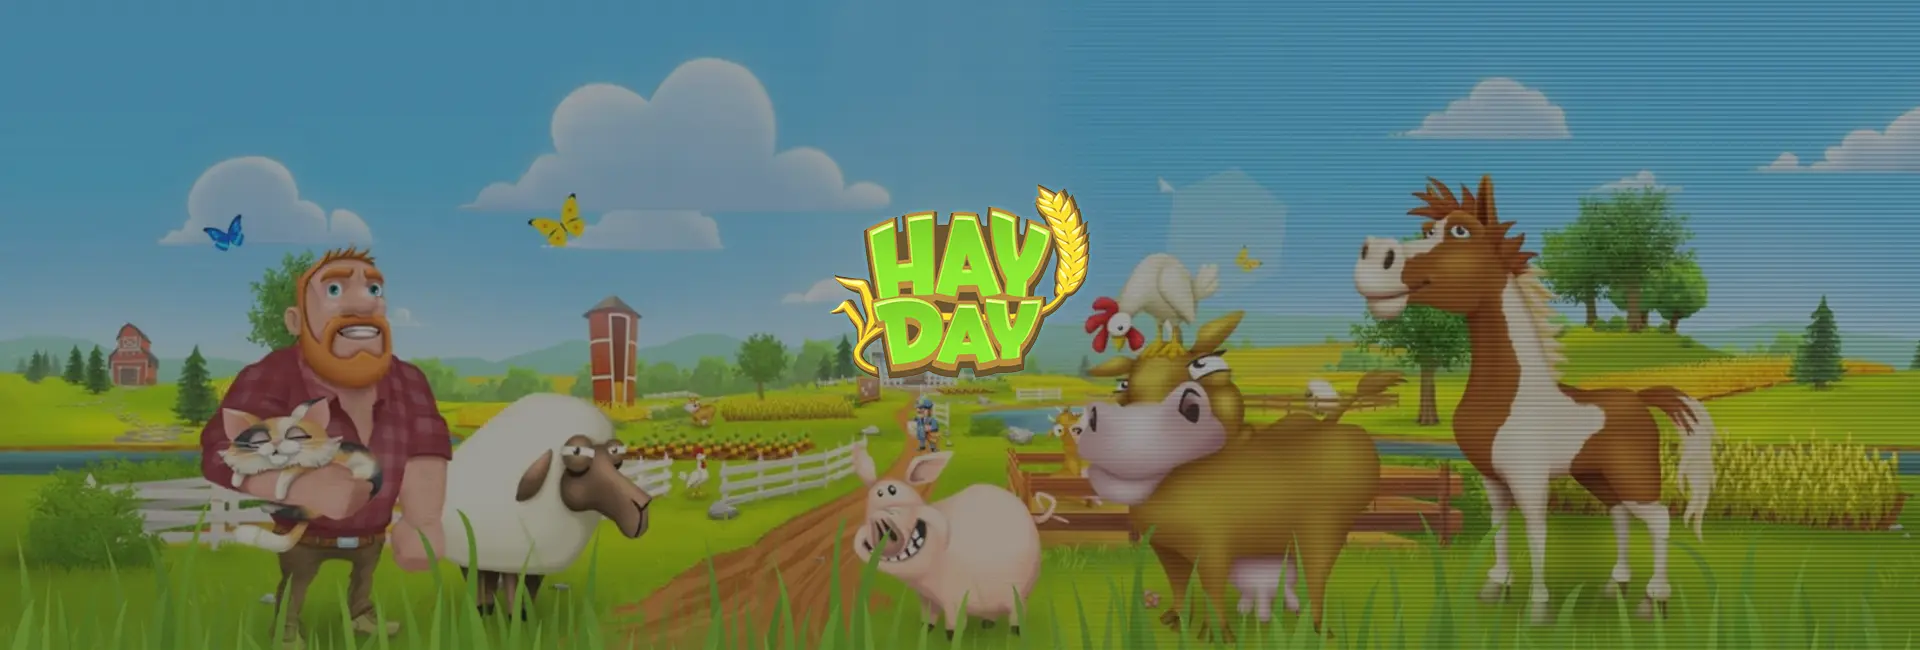 Hay Day - 275 + 28 (Global)